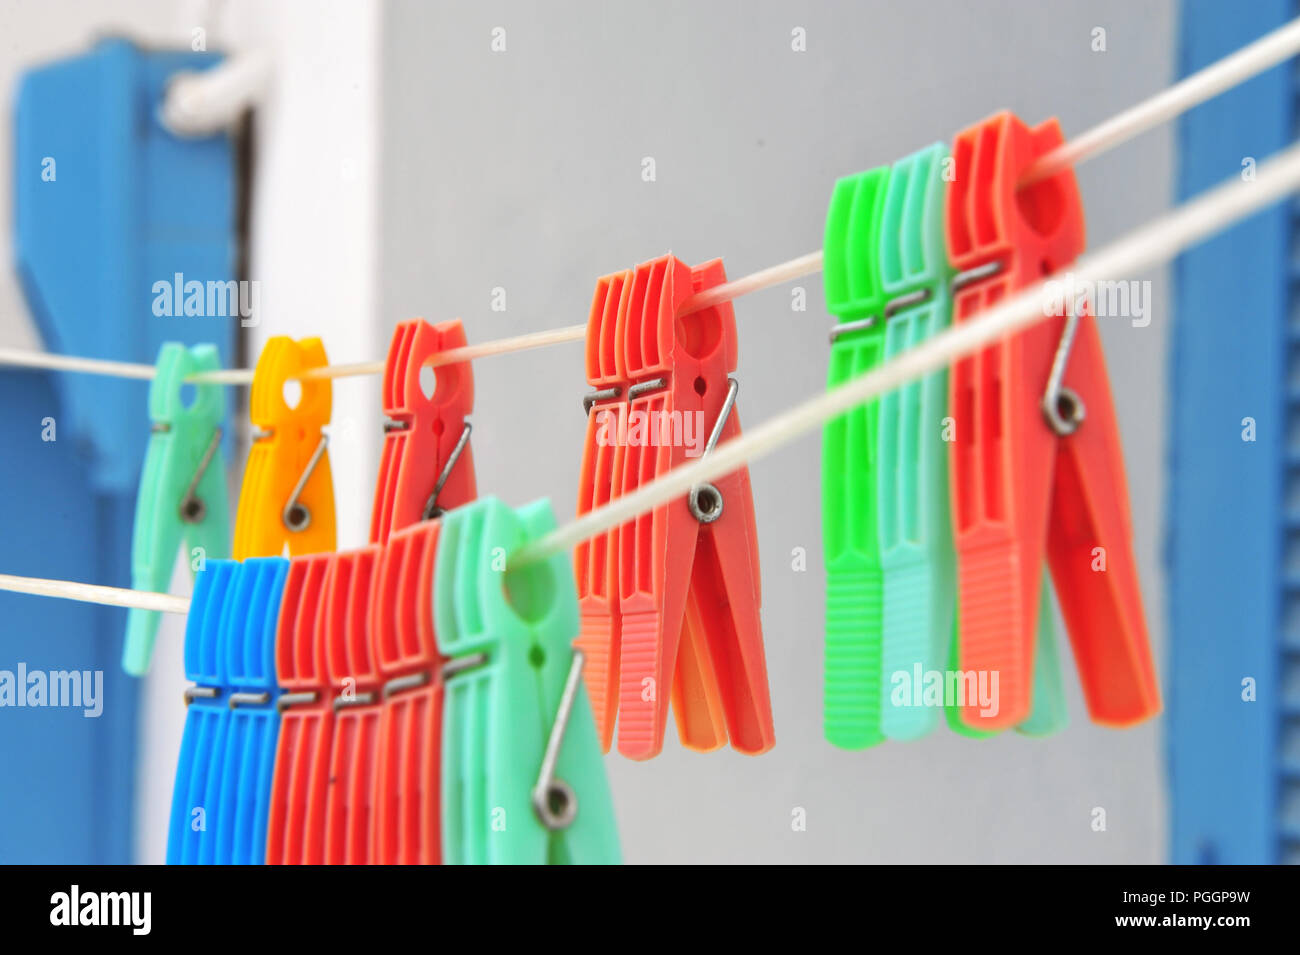 Hanging colorful clothes pegs in the street Stock Photo